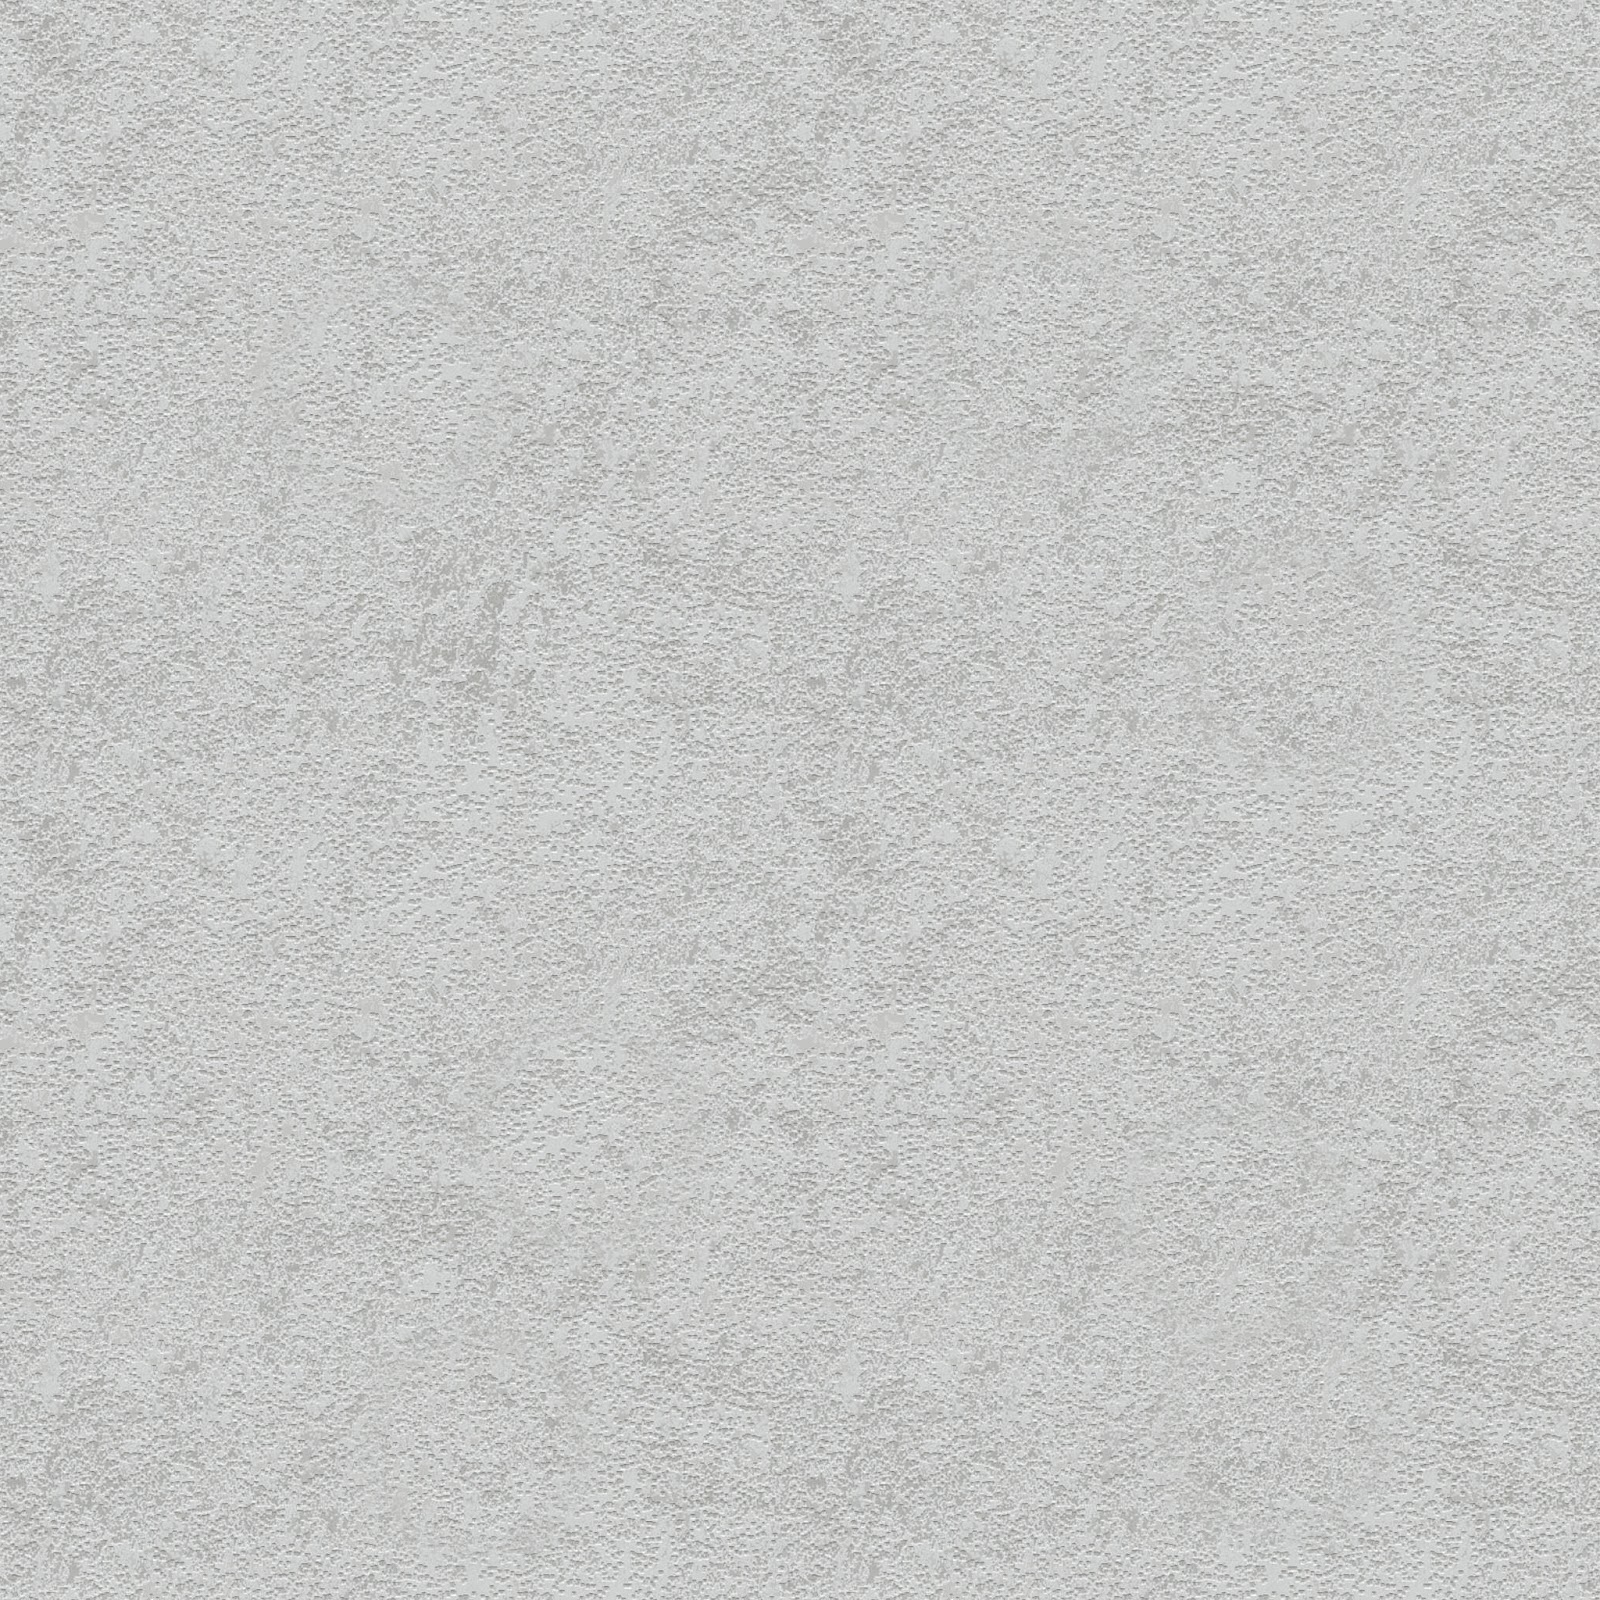 Texturise Free Seamless Textures With Maps Seamless Plaster Wall Stucco Paint Texture Maps